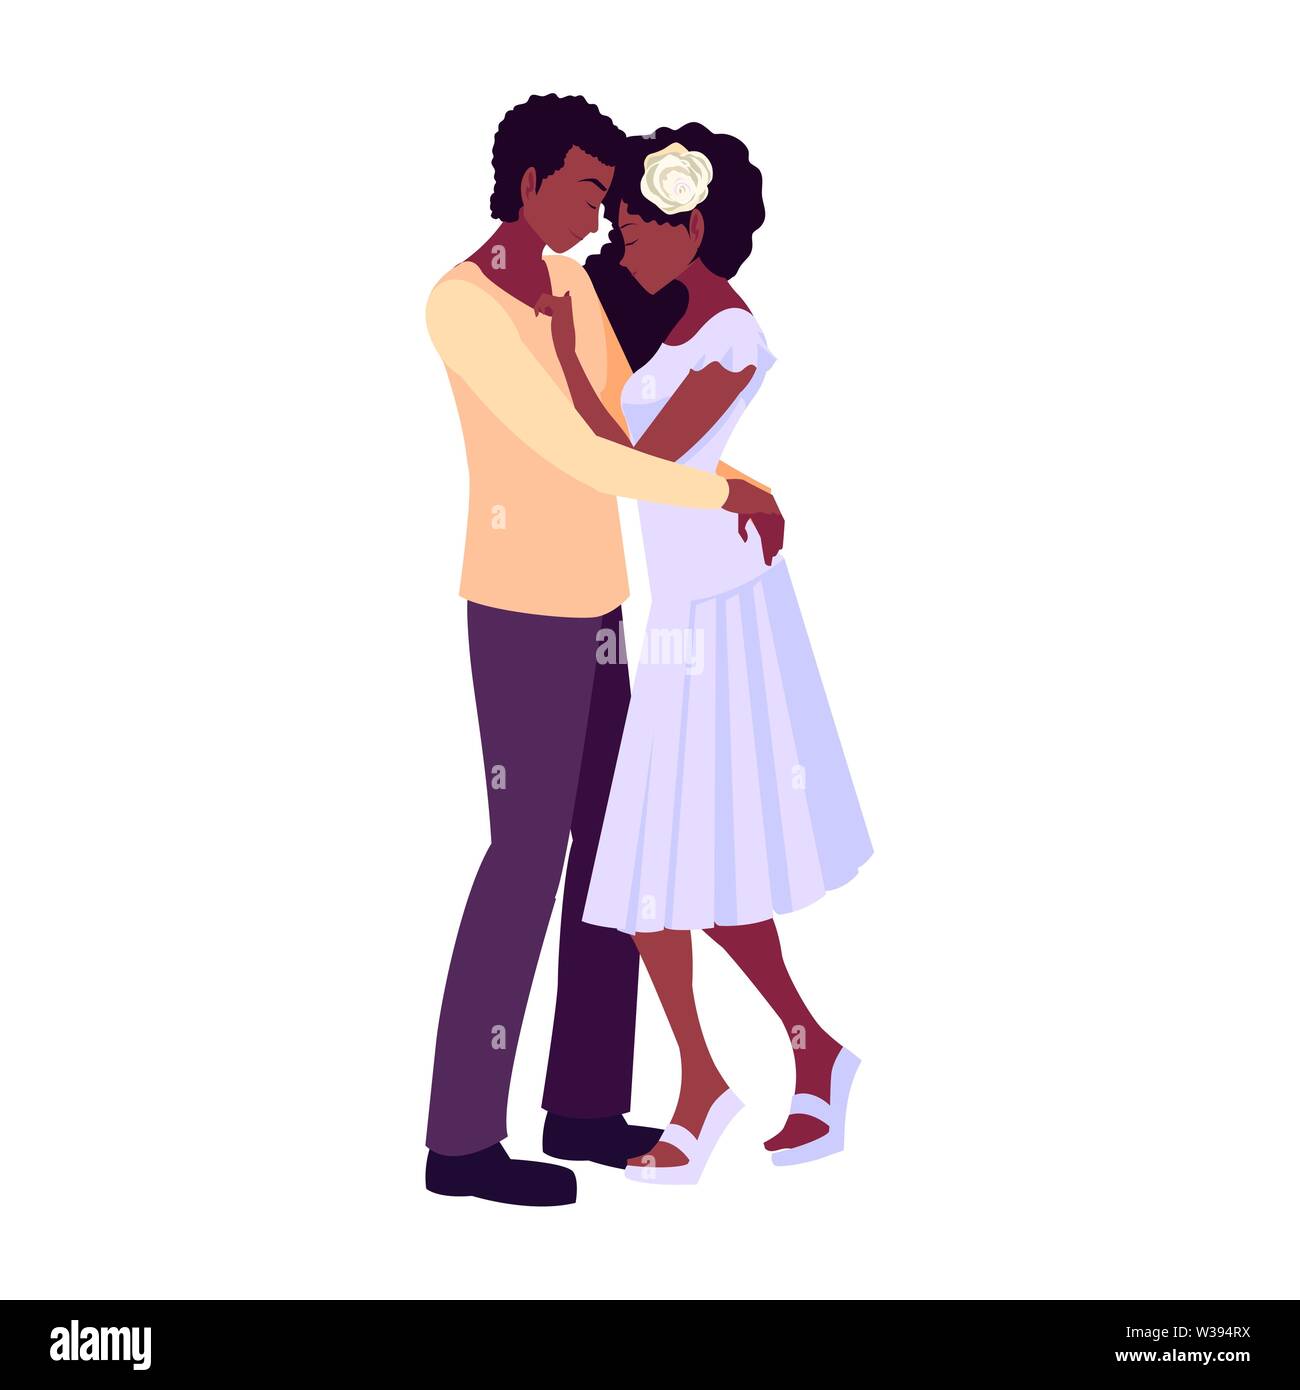 romantic couple hugging love image white background vector ...